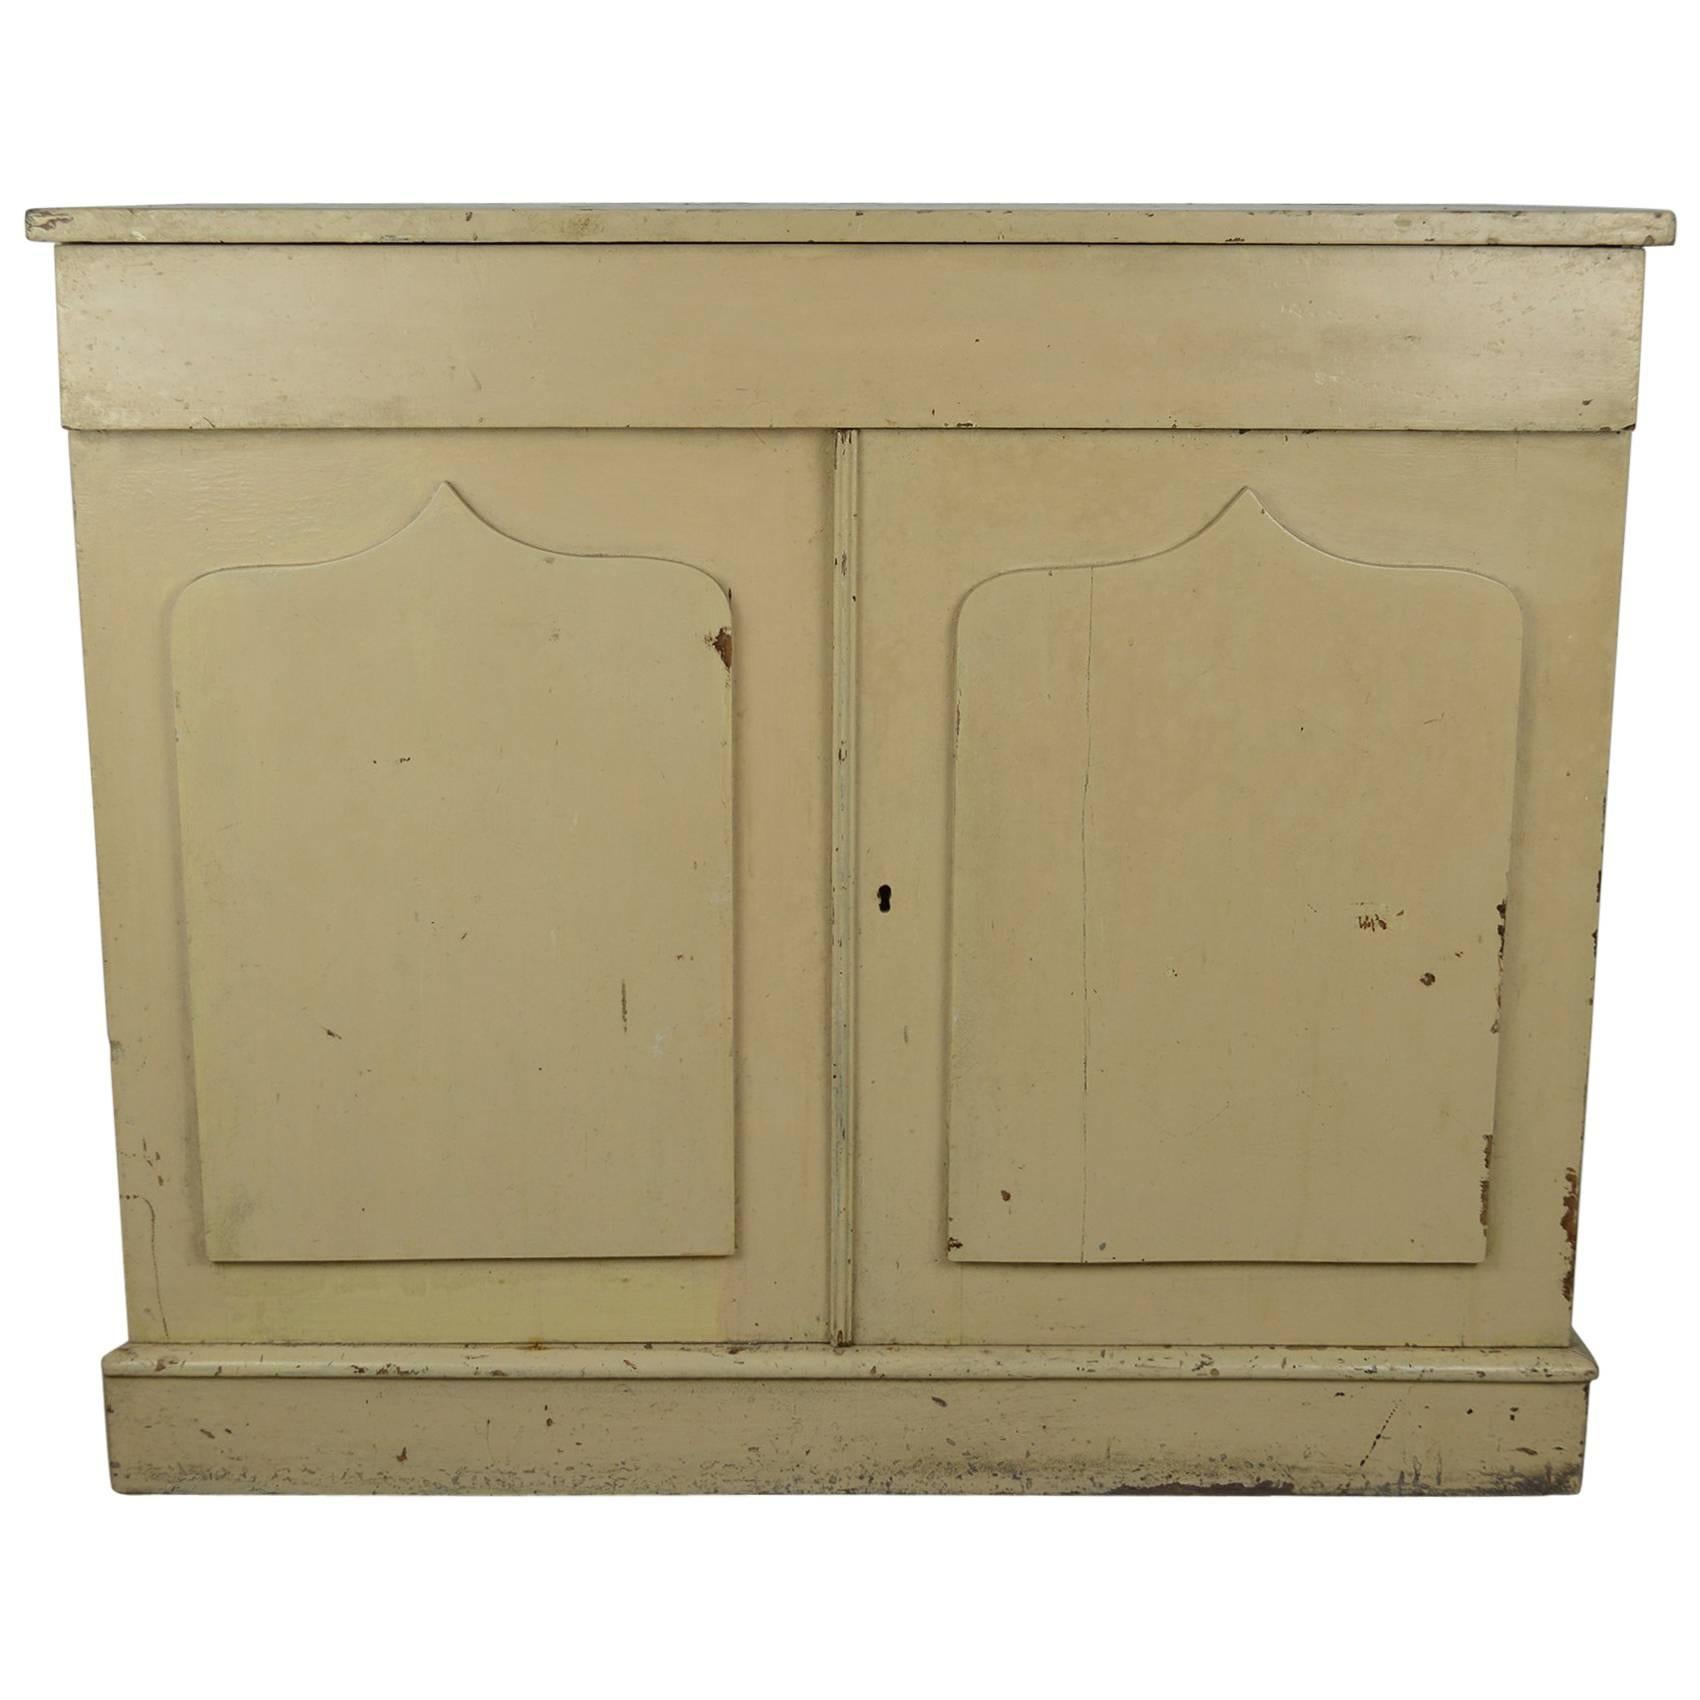 Antique Cream Painted Cupboard or Buffet, English 19th Century